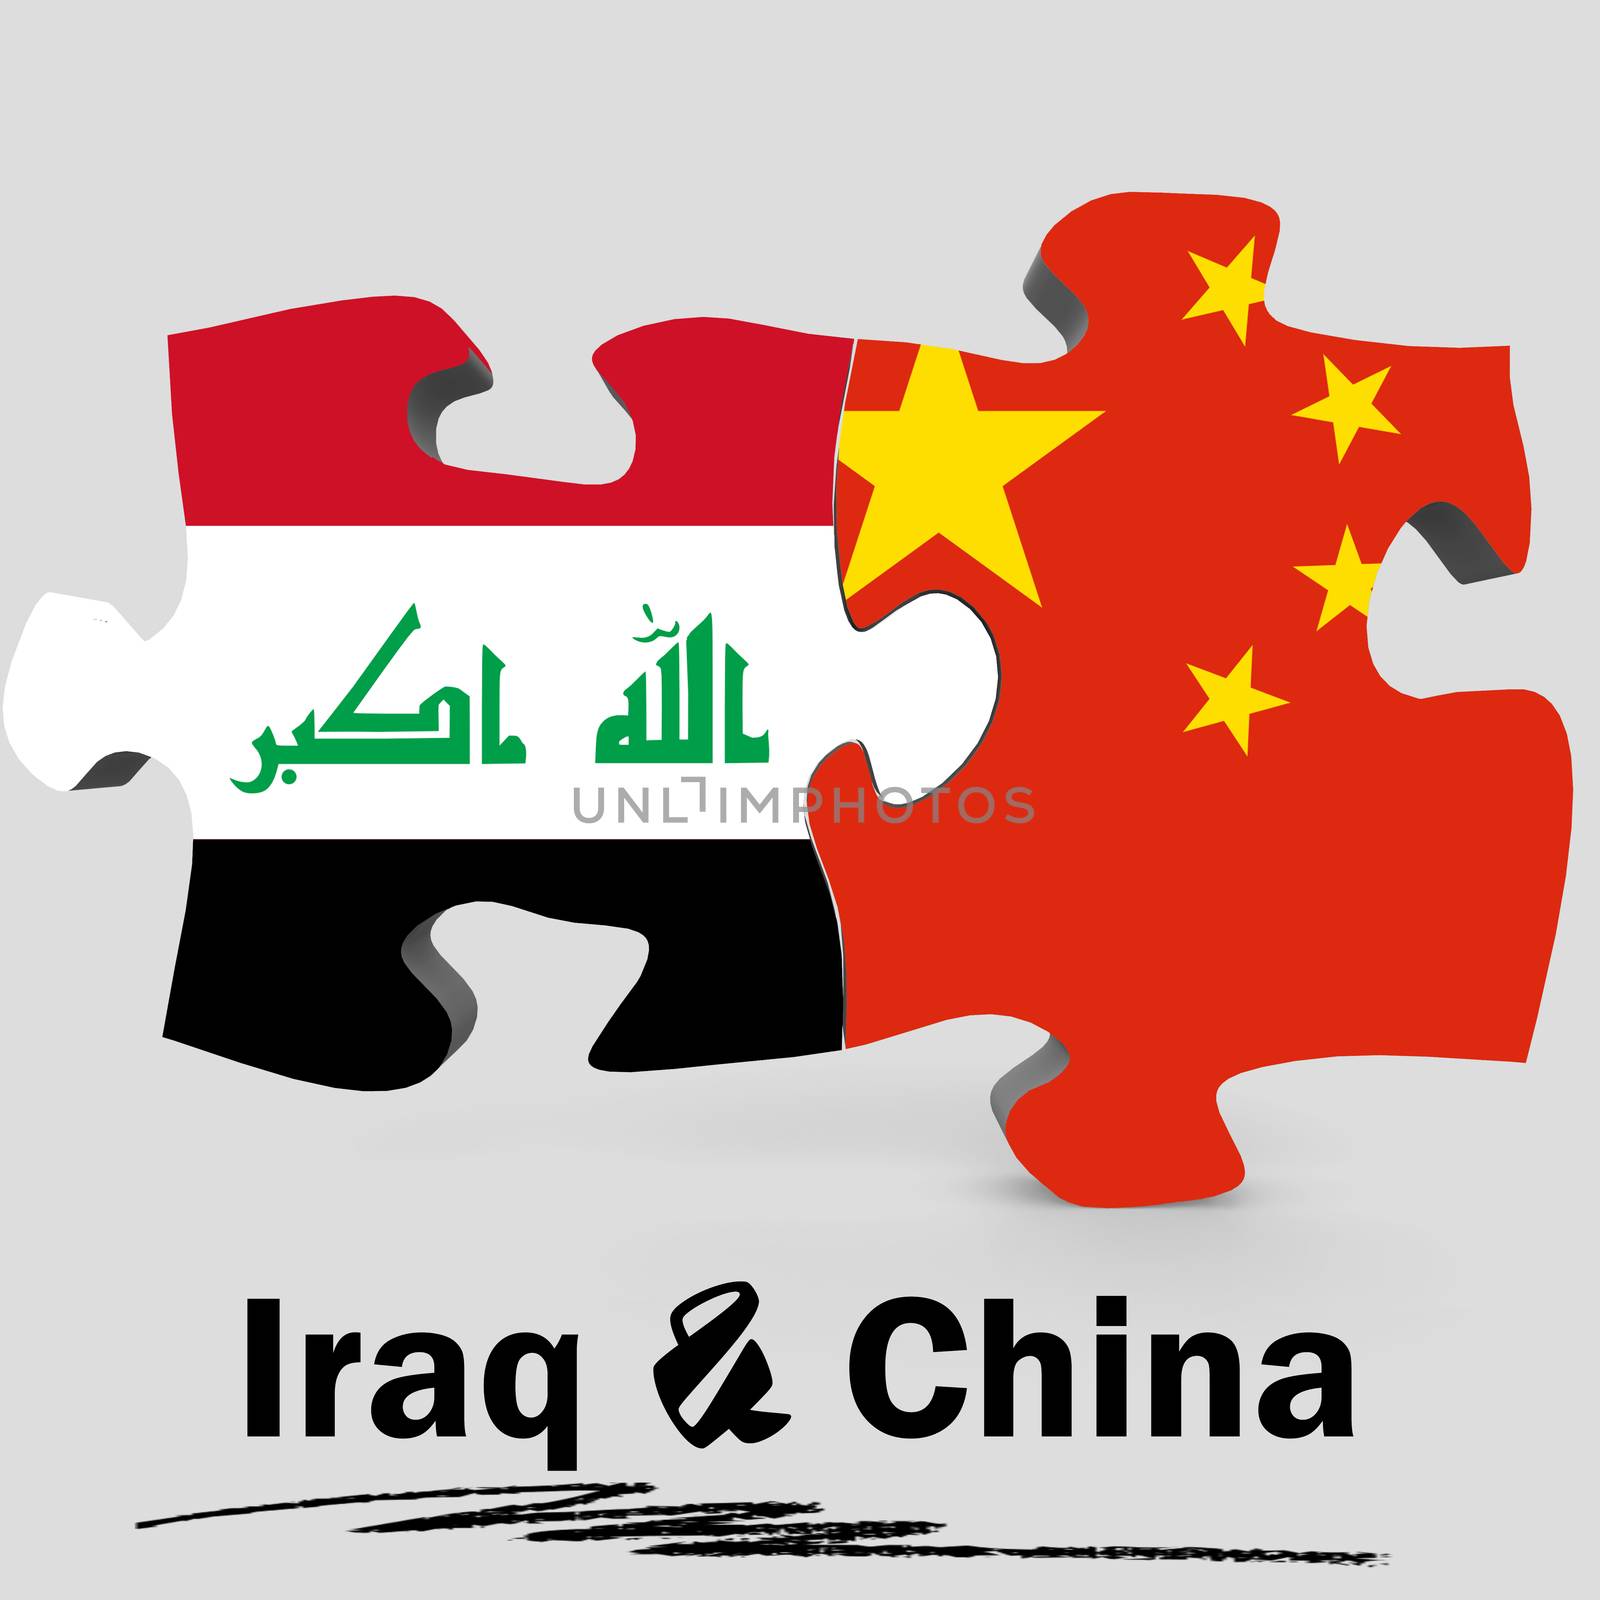 China and Iraq flags in puzzle by tang90246